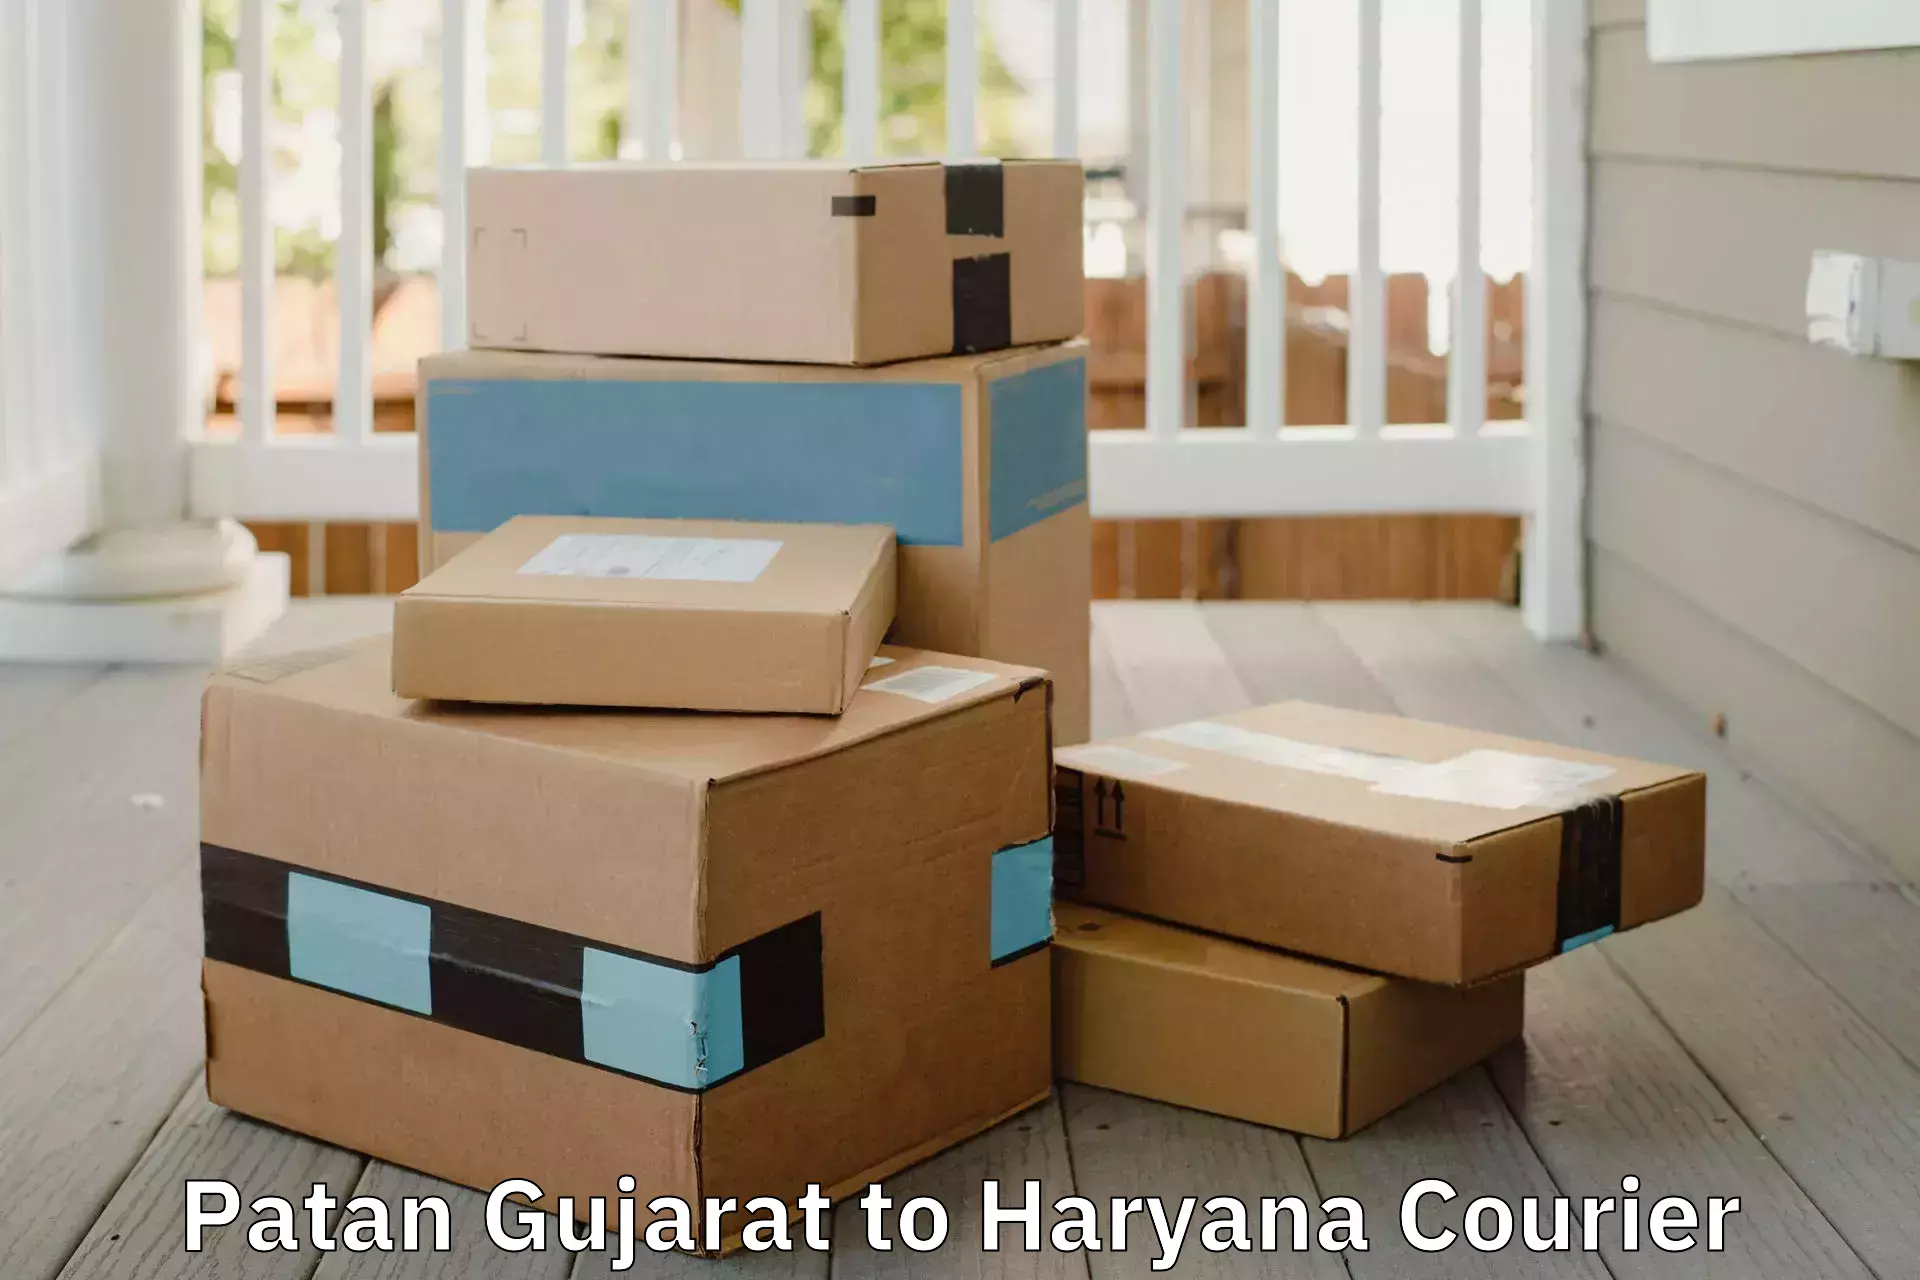 Trusted relocation services Patan Gujarat to Jhajjar